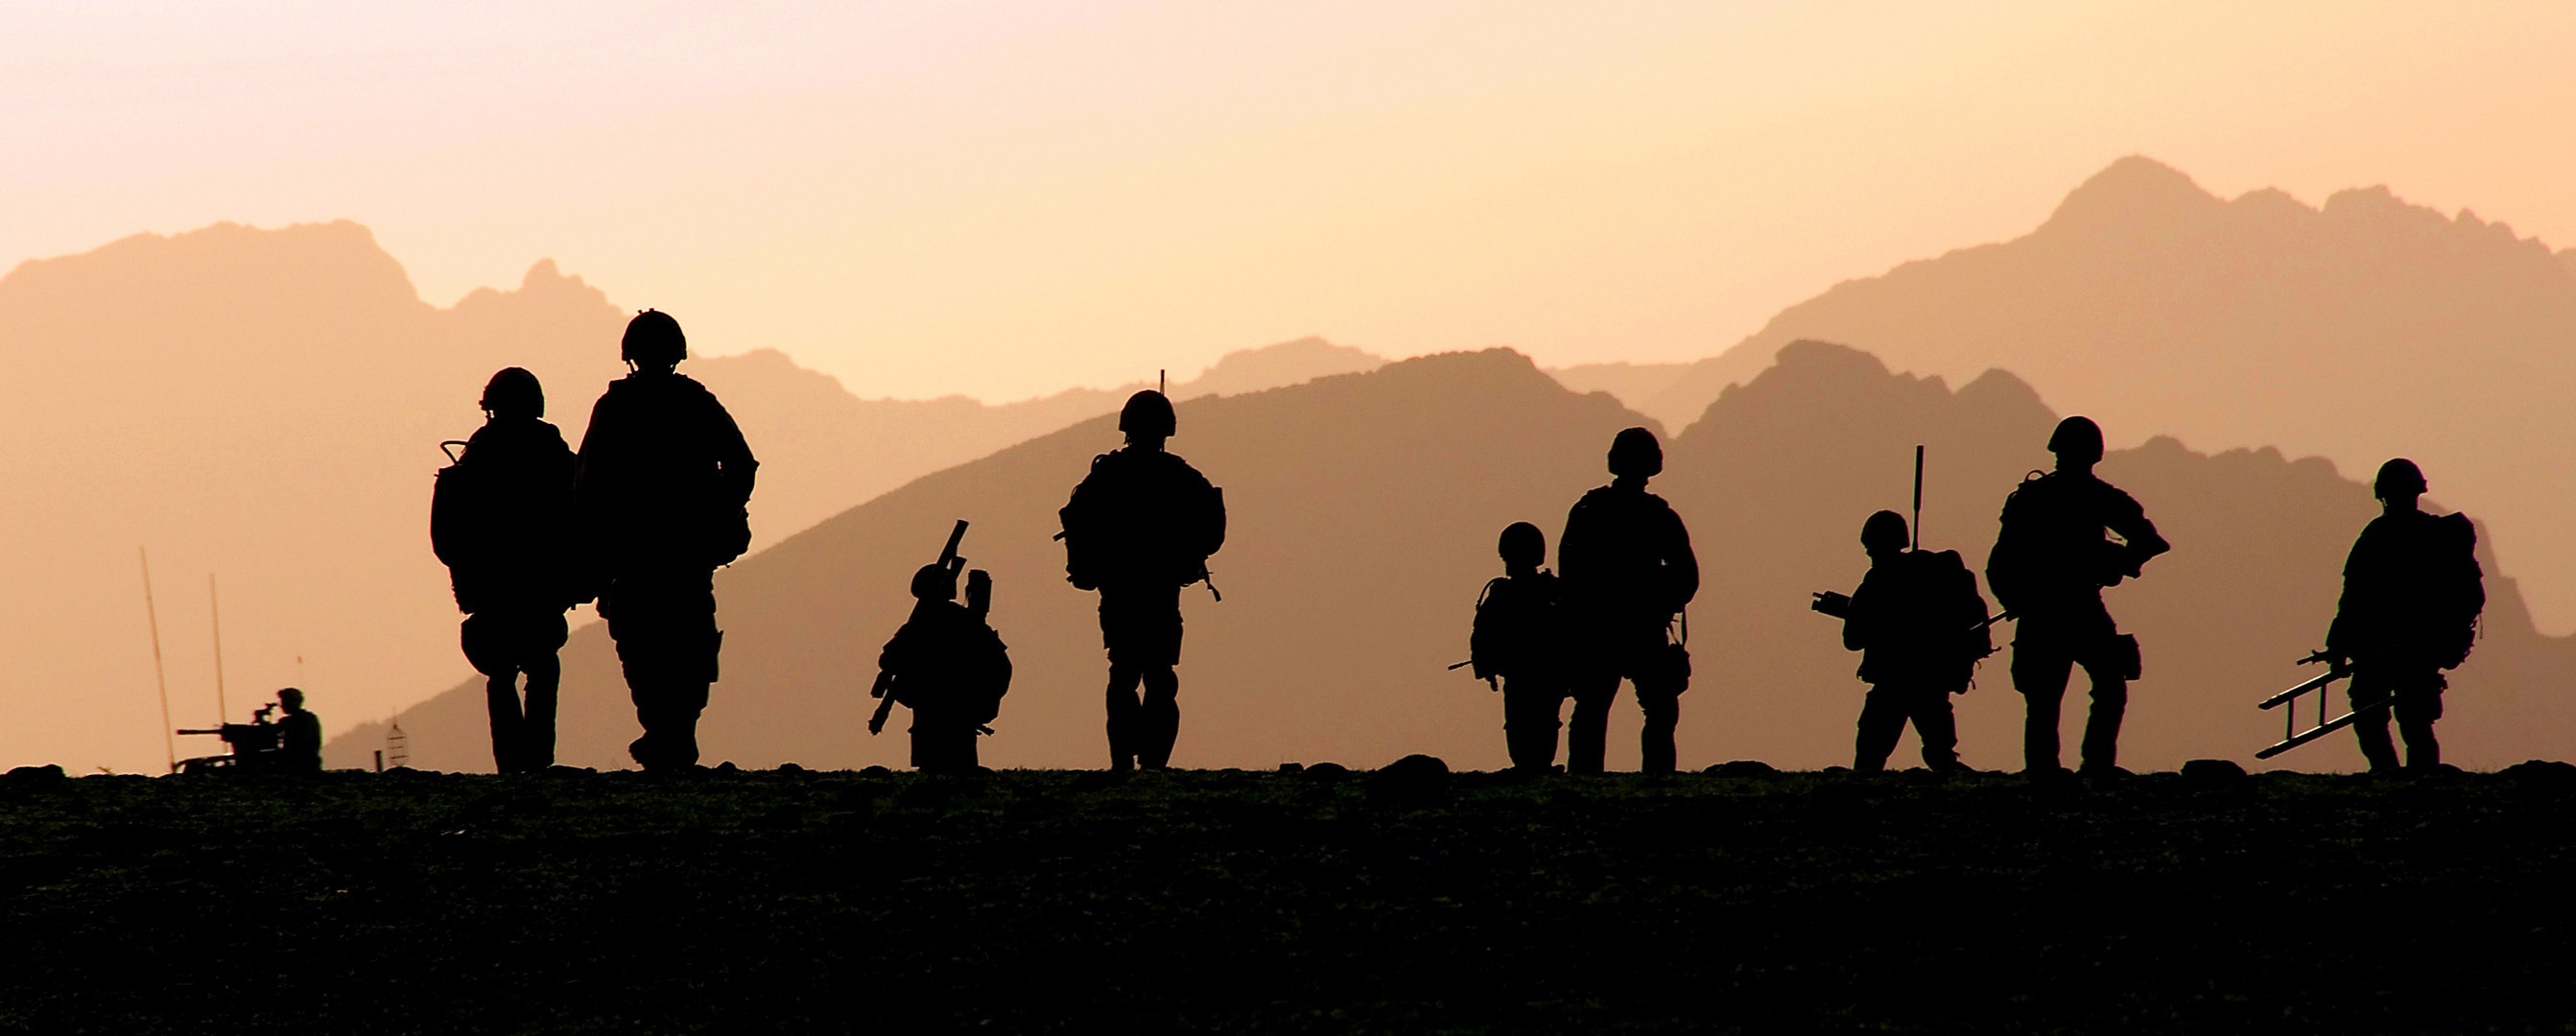 military, Silhouette, Royal Marines Wallpapers HD / Desktop and Mobile